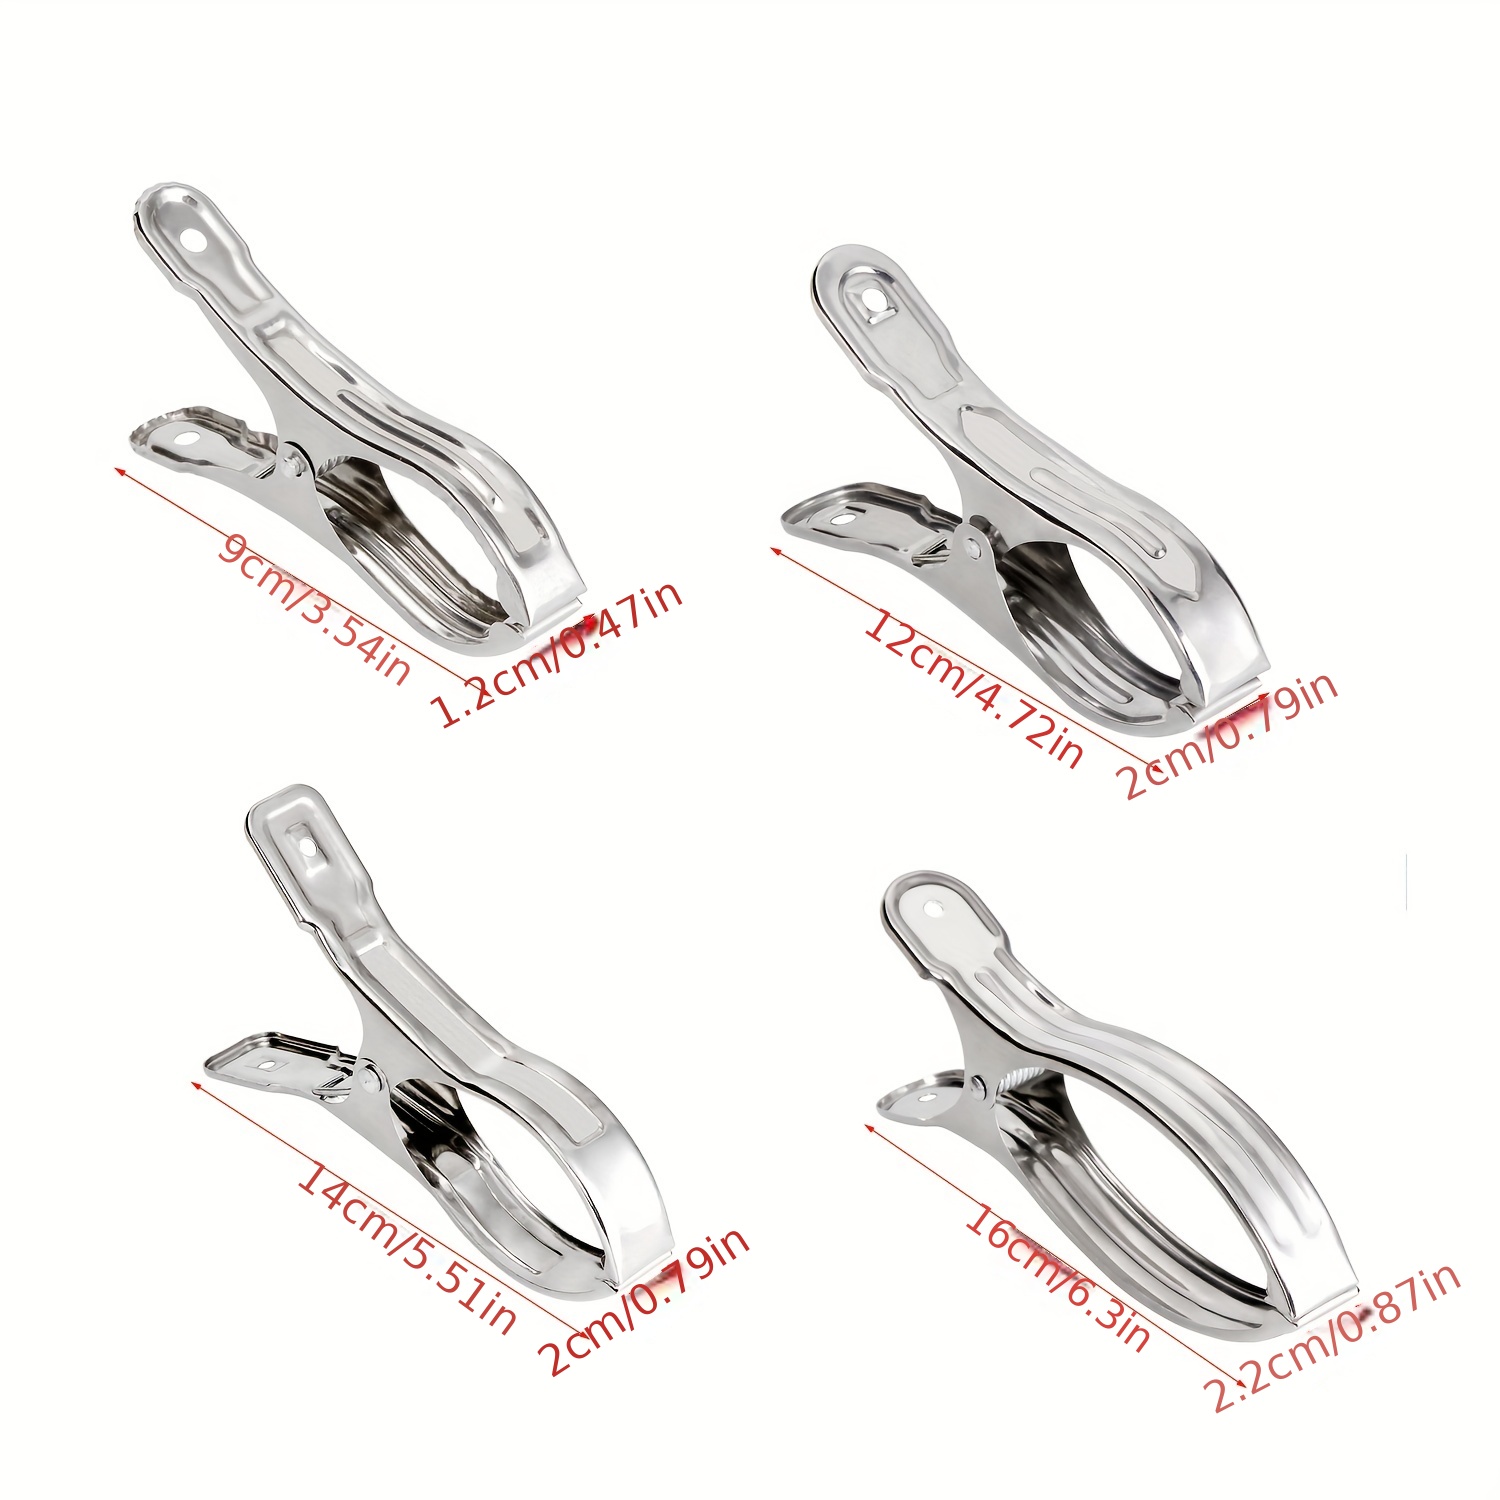 4pcs Heavy Duty Clothespins Multi-functional Clothes Pin